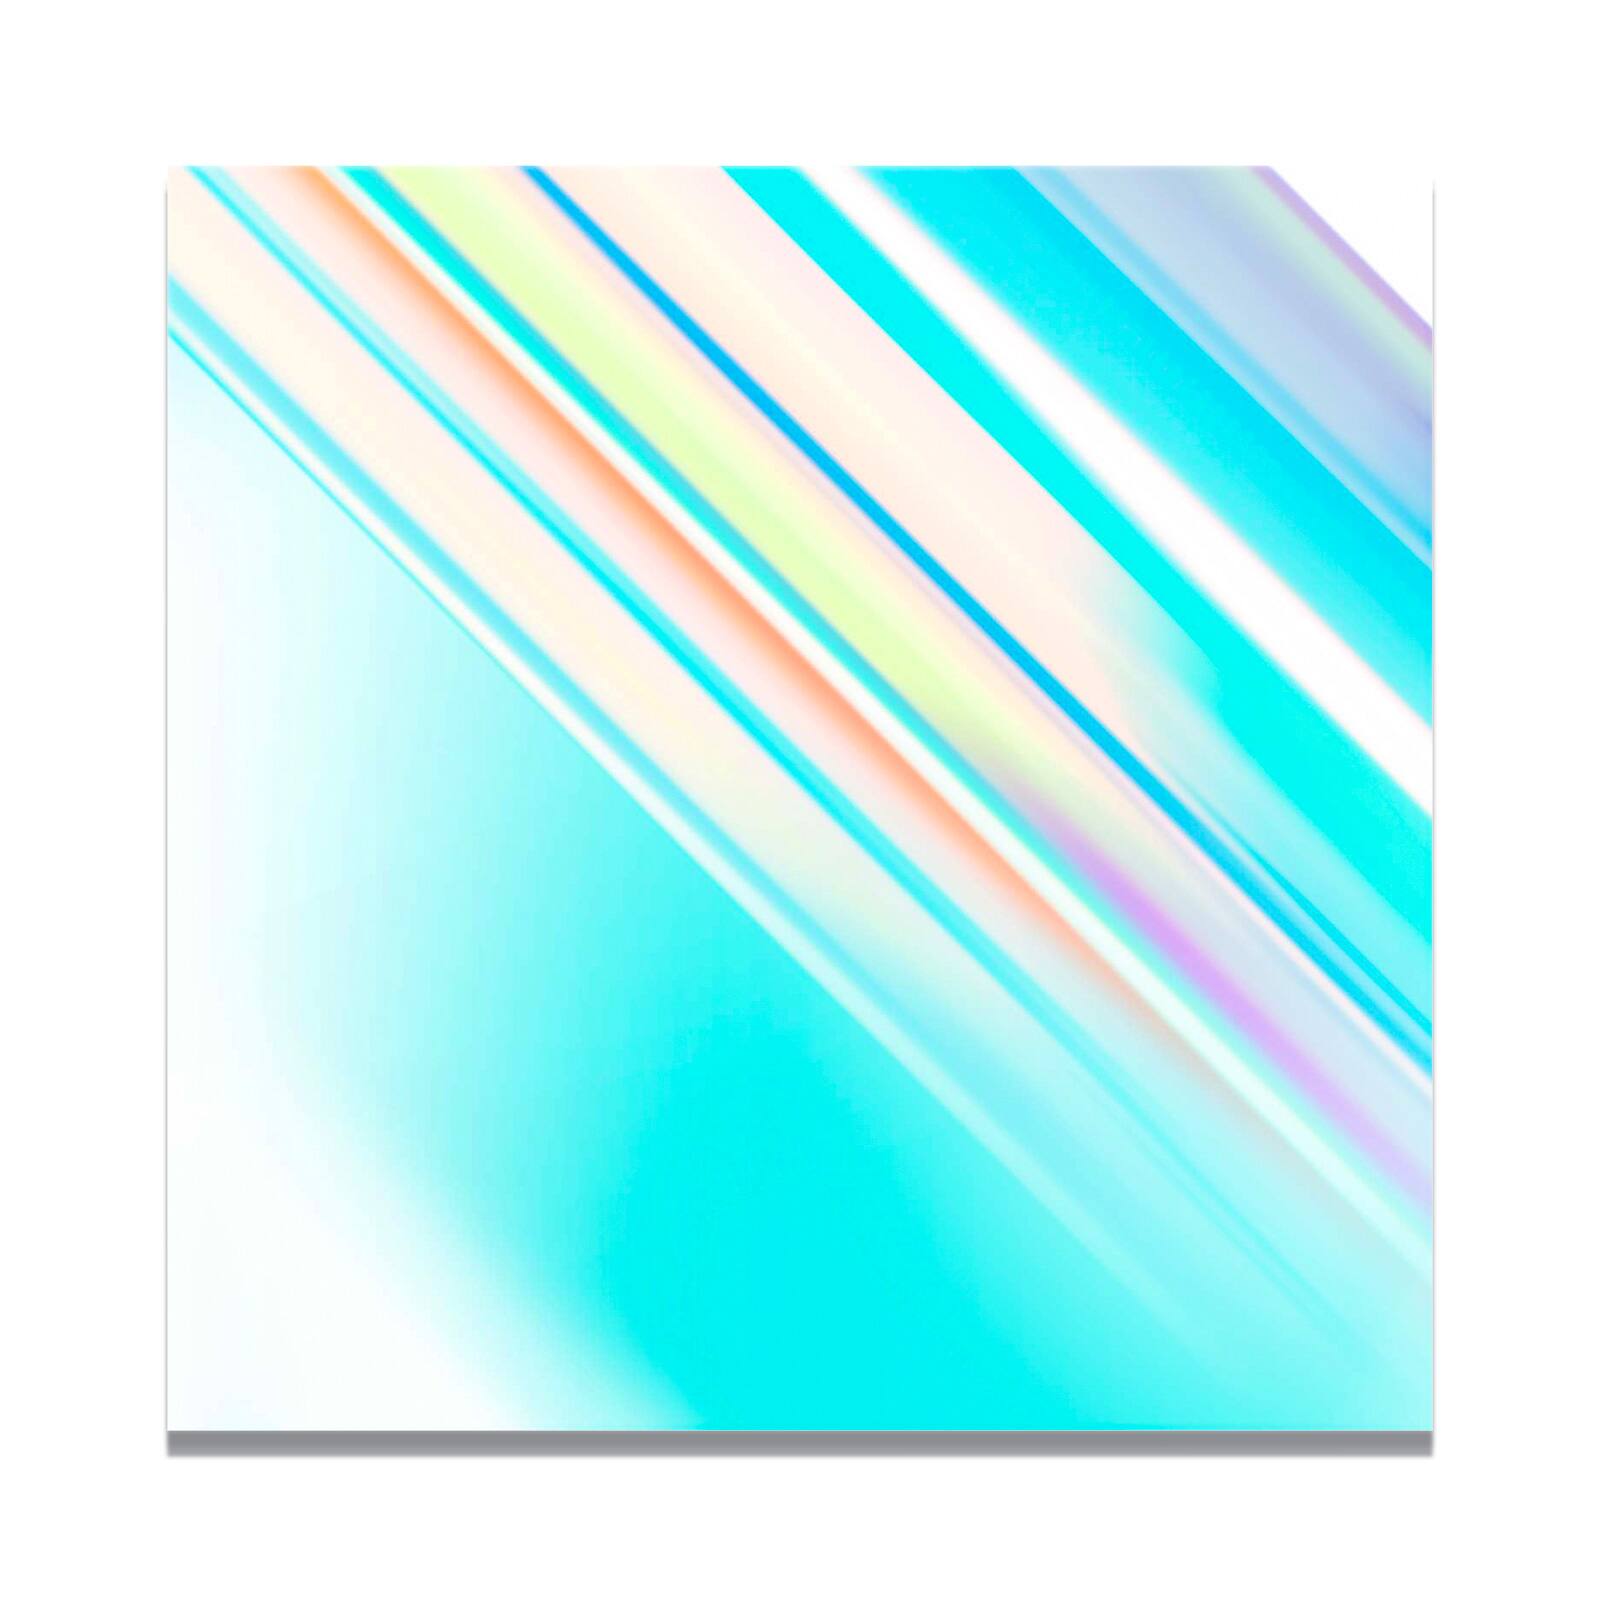 12x12 Blue Chrome Adhesive Vinyl Sheets for Maker Explore Blue Holographic Mist, 5-pk Stickers Blue Holographic Sparkle Vinyl Cups Silhouette Cameo Glass by StyleTech x Turner Moore Edition 